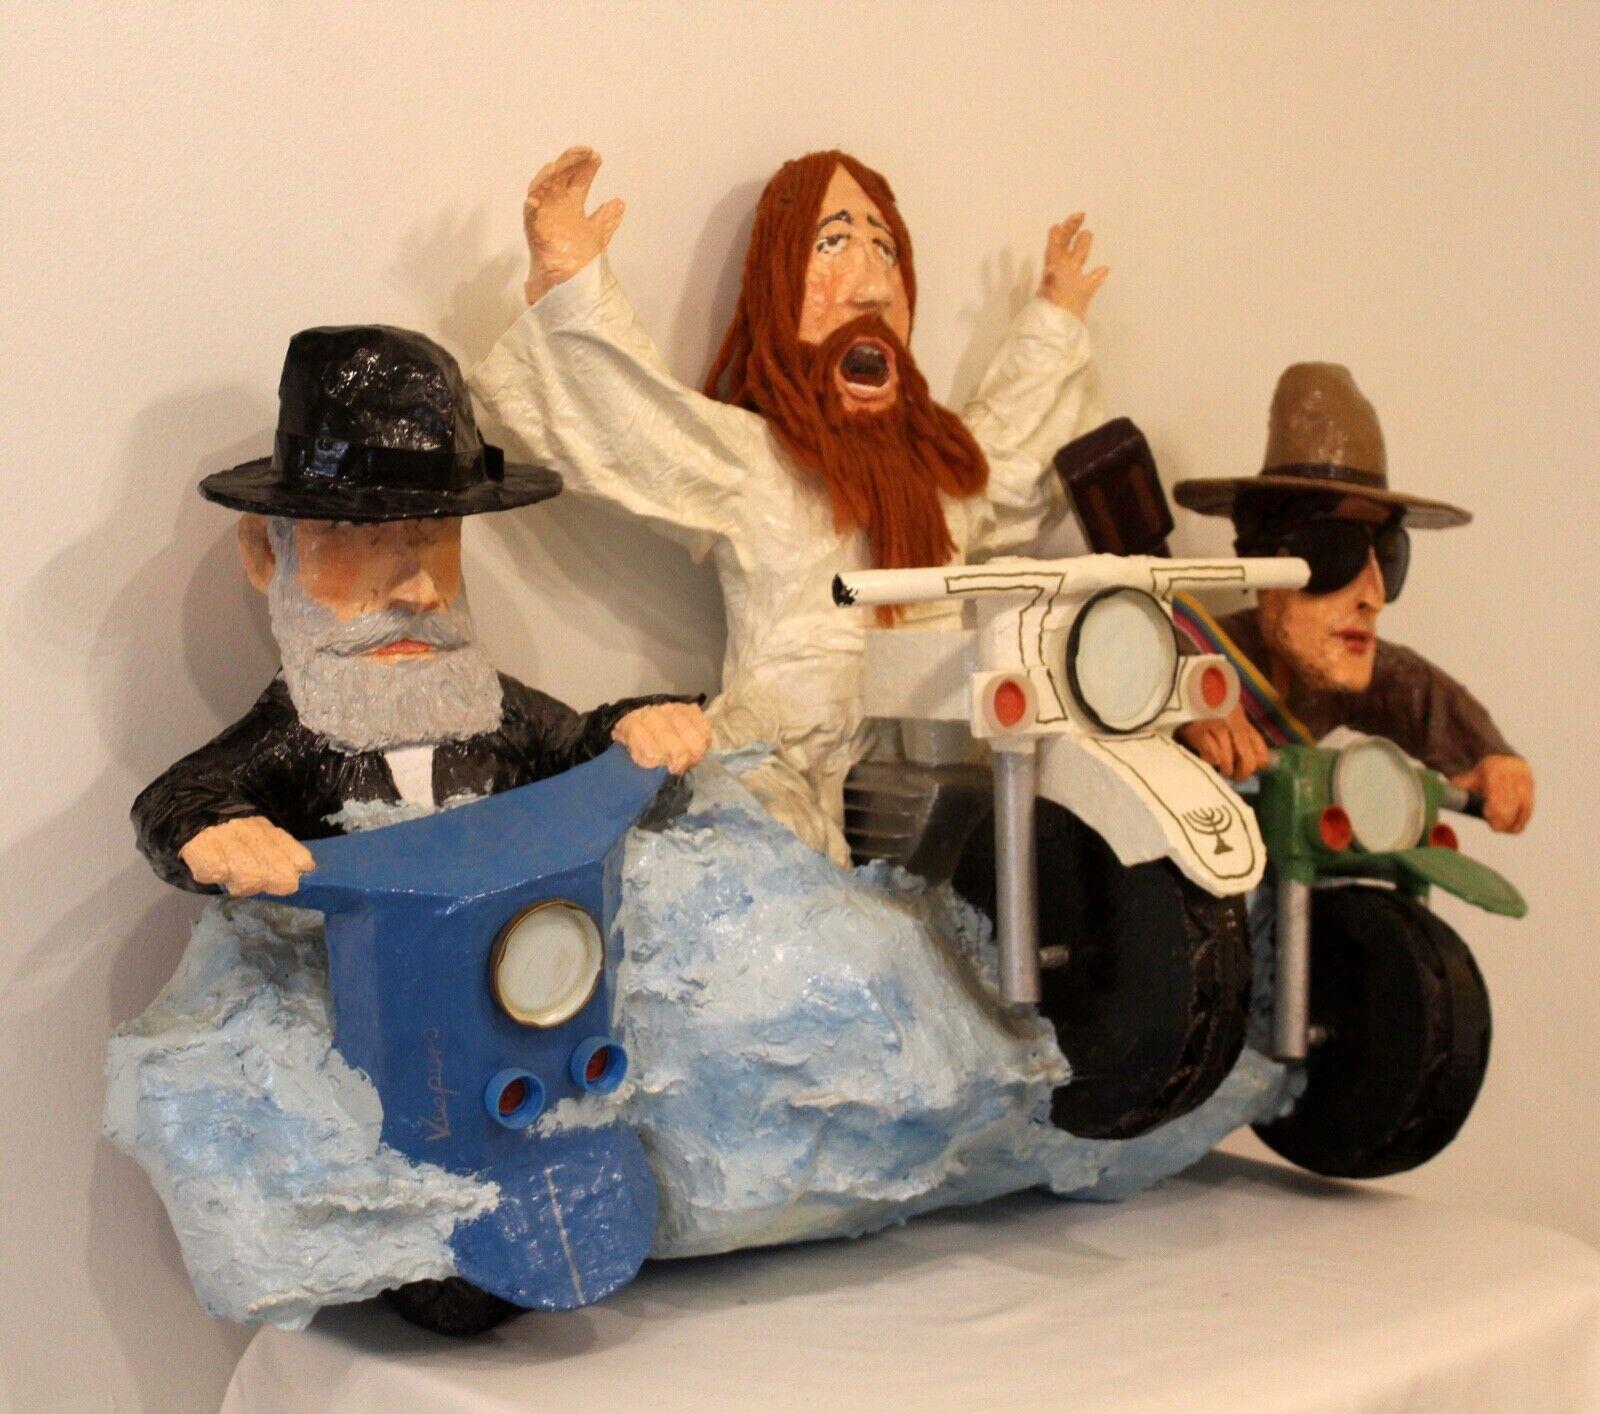 A motorcycle-riding Jesus, Hassidic Rabbi and Bob Dylan take to the road as Jesus literally takes the wheel. The expression of glee on all three character's faces as they get set to race through the crowded streets on this unconventional